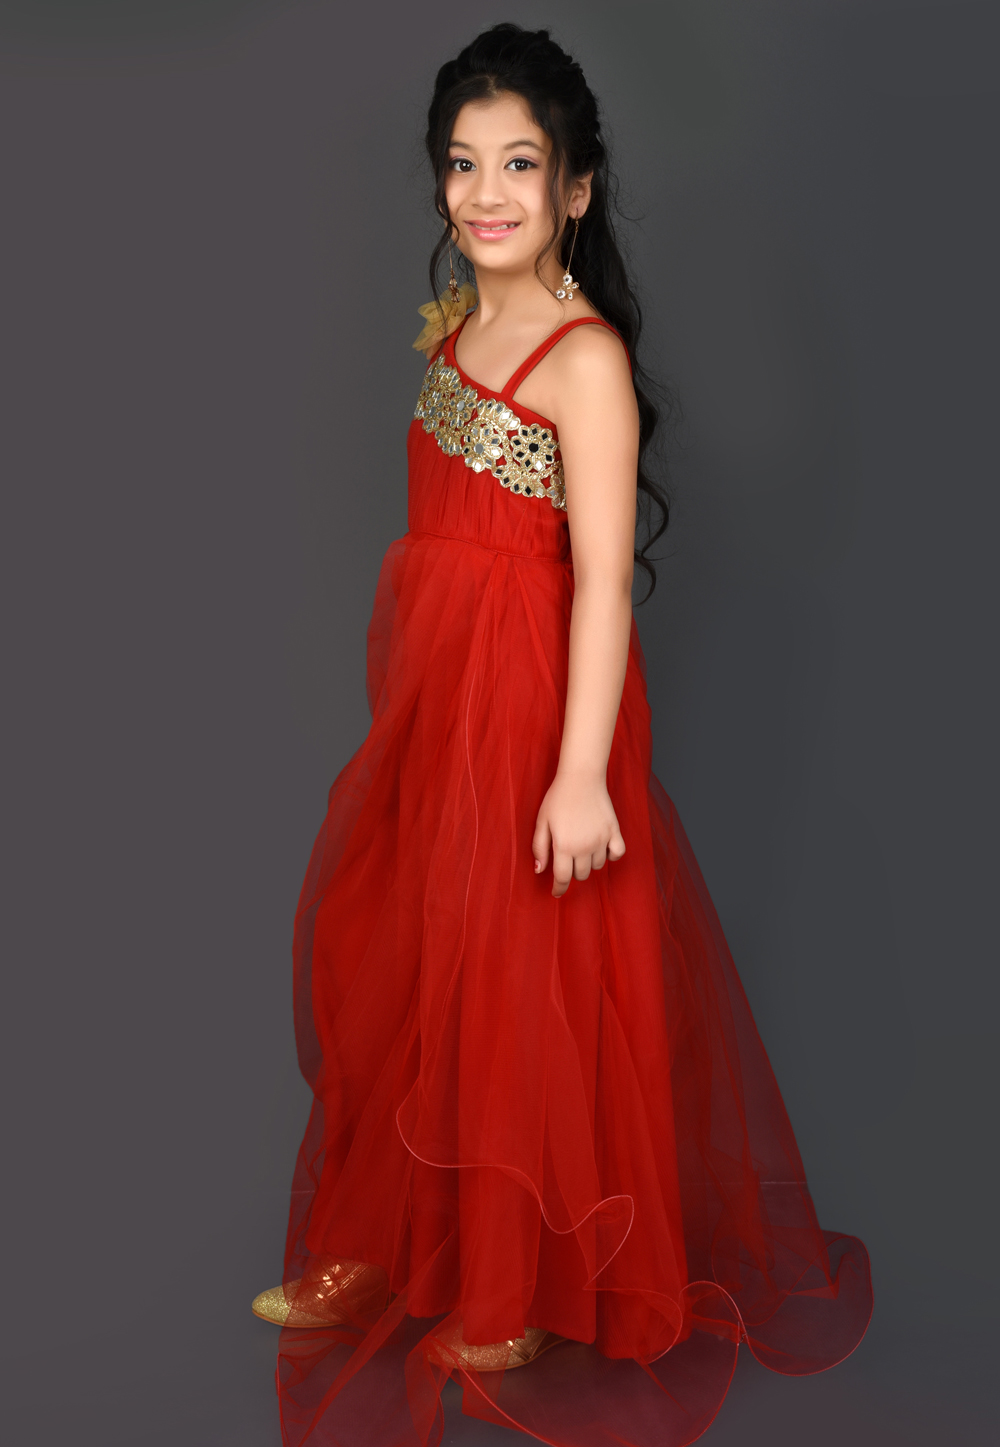 Net Kids Party Wear DUSTY ROSE Gown TBFB22-130DR at Rs 599 in Faridabad